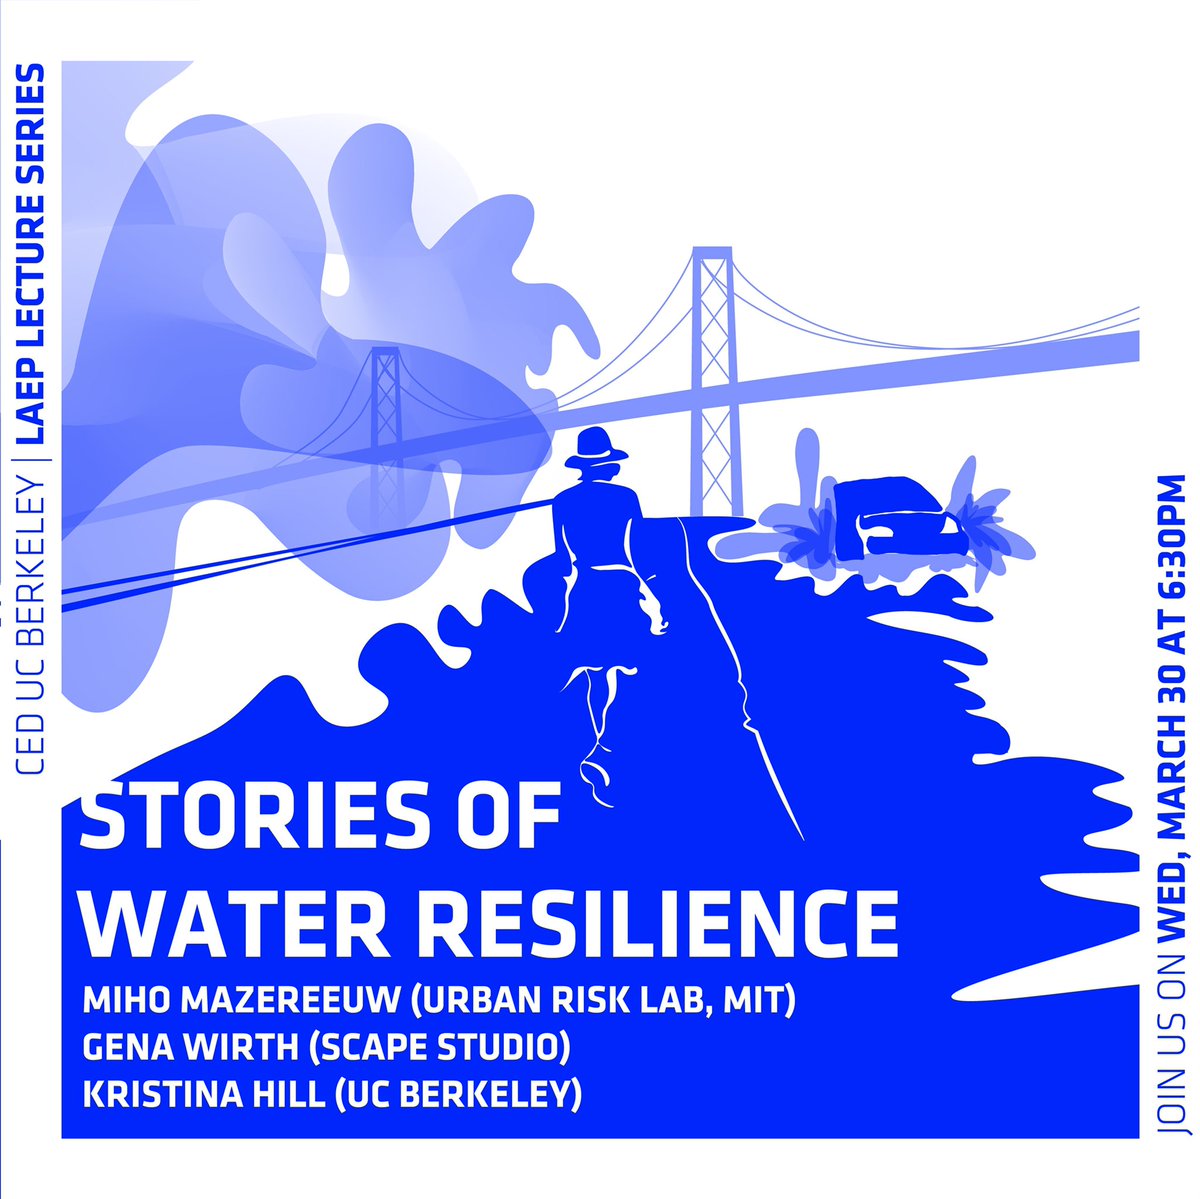 This week, tune in to hear @genevawirth at two virtual events: 1️⃣ Tomorrow (3/30) for @ced_berkeley’s ‘Stories of Water Resilience’ alongside @kzhill and Miho Mazereeuw (@urbanrisklab). 🔗: bit.ly/3NvivJH